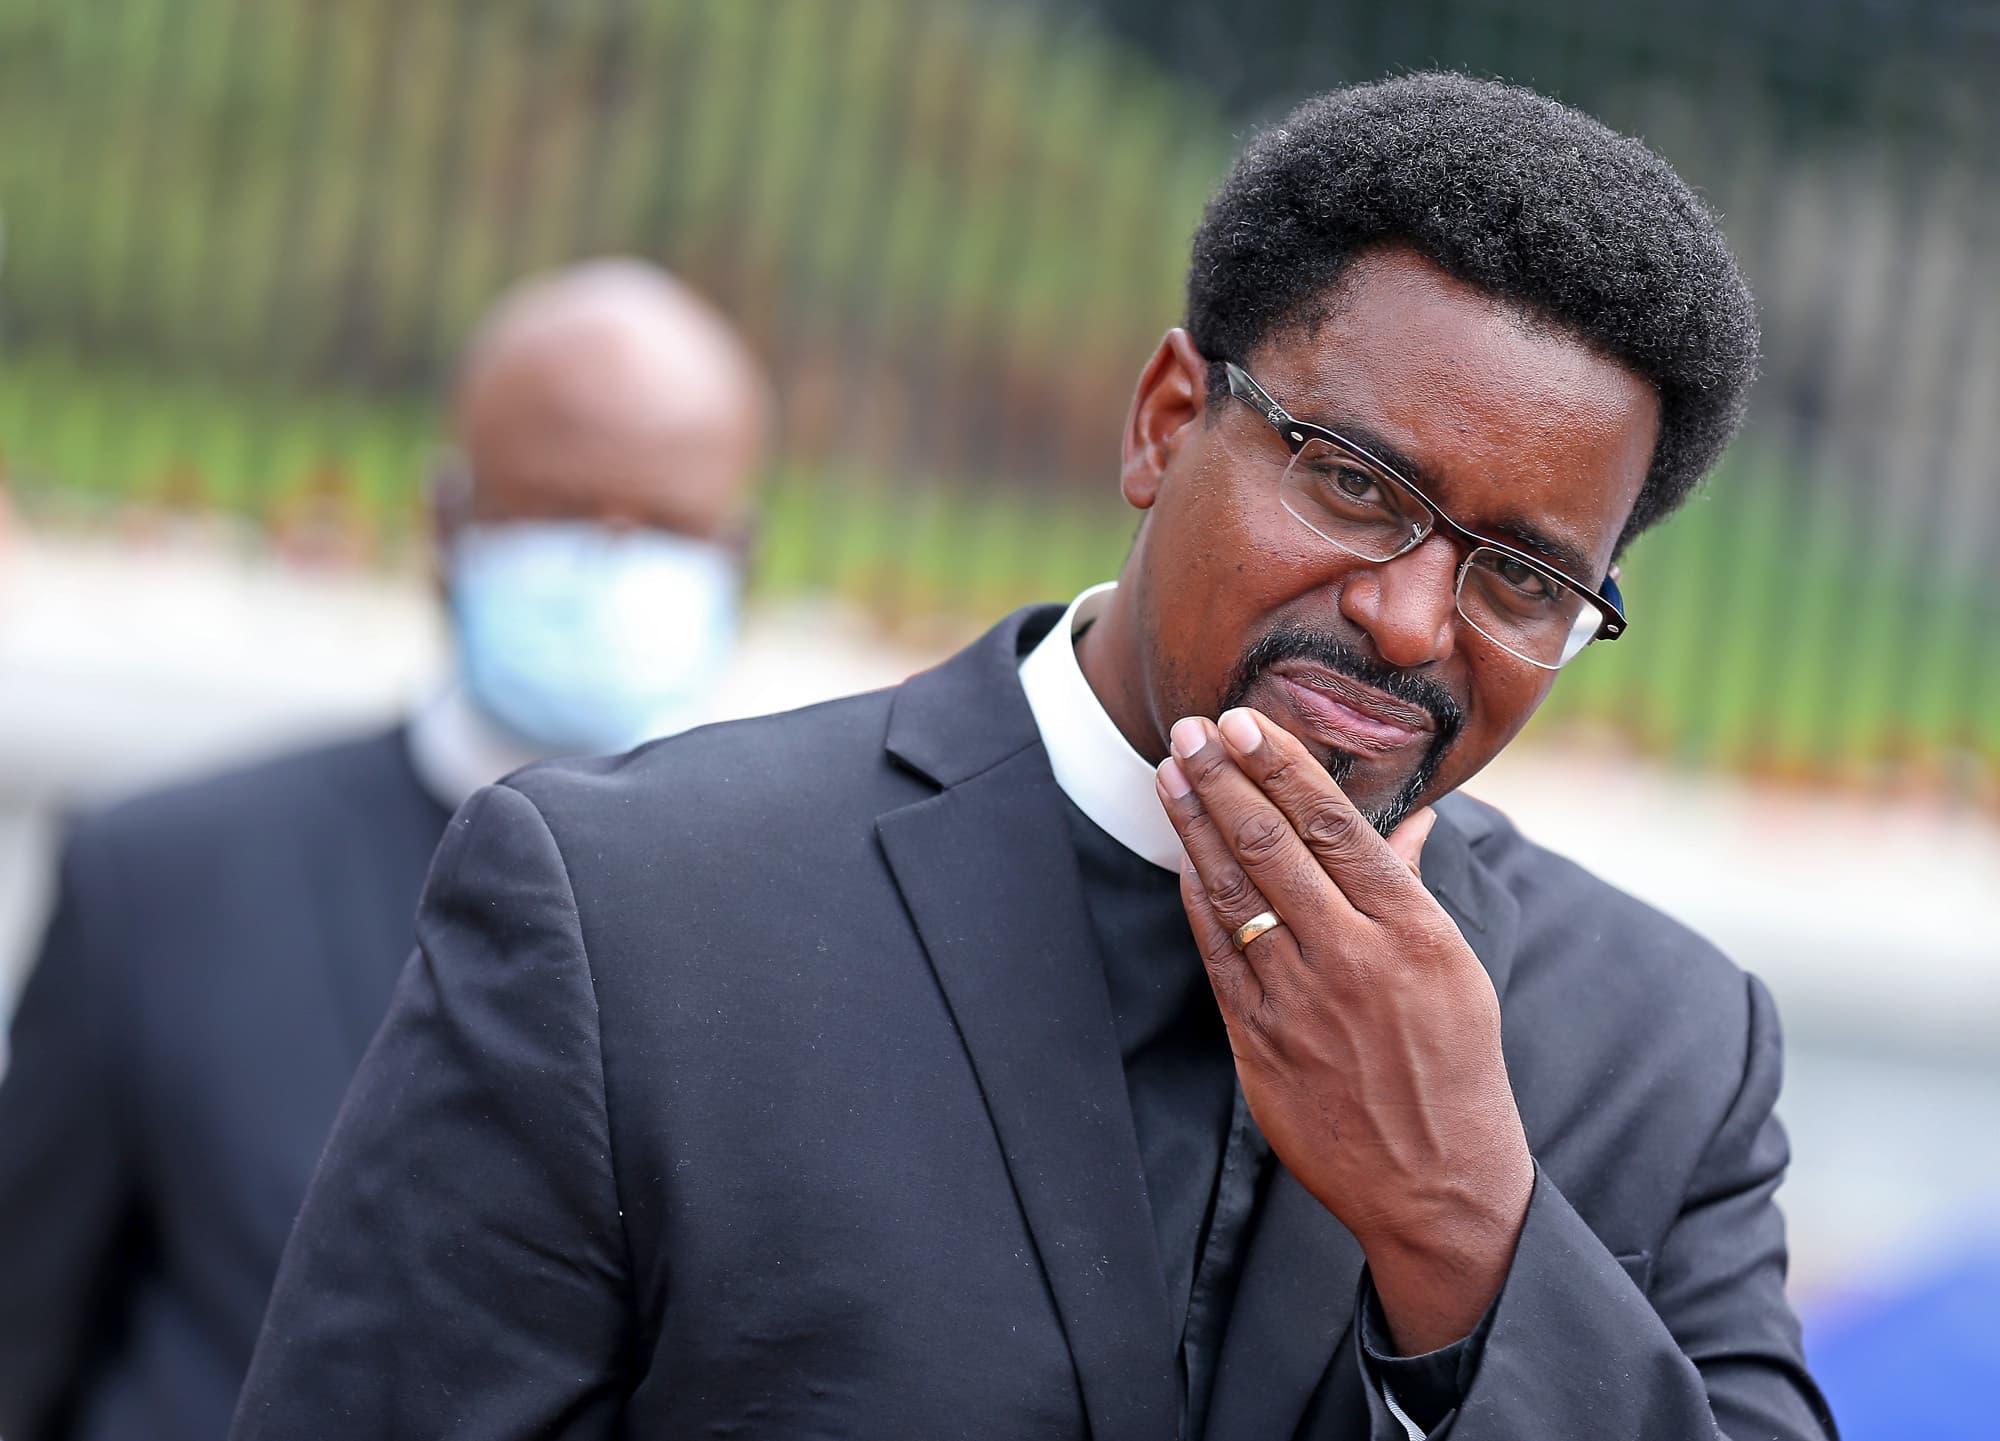 Rev. Rahsaan Hall, of the St. Paul AME Church in Cambridge, speaks outside the State House on July 20, 2020 in Boston. (Matt Stone/MediaNews Group/Boston Herald)